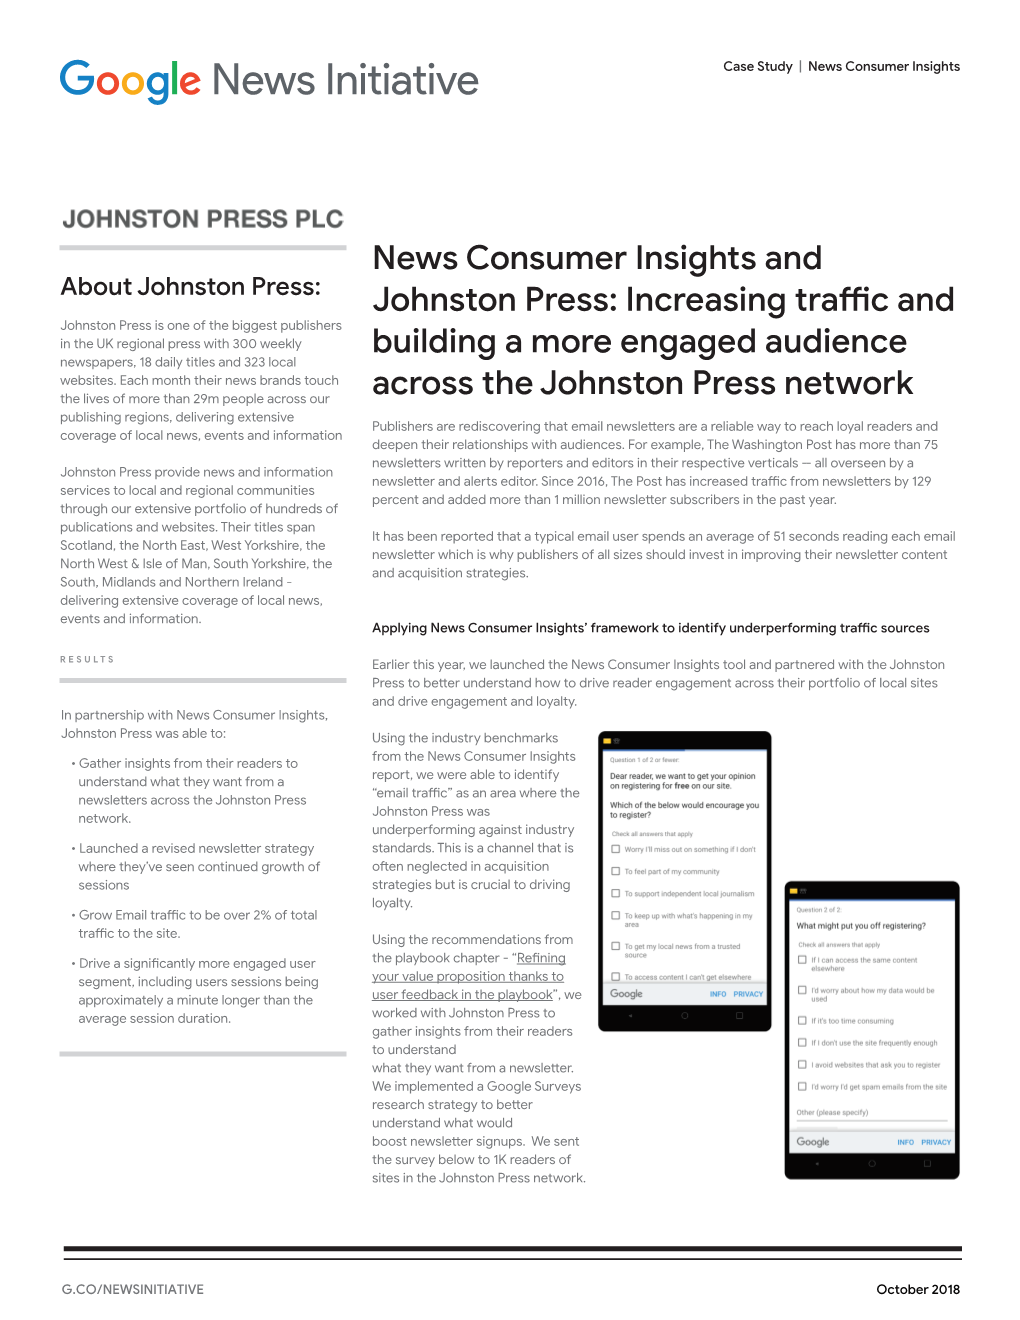 News Consumer Insights and Johnston Press: Increasing Traffic and Building a More Engaged Audience Across the Johnston Press Network